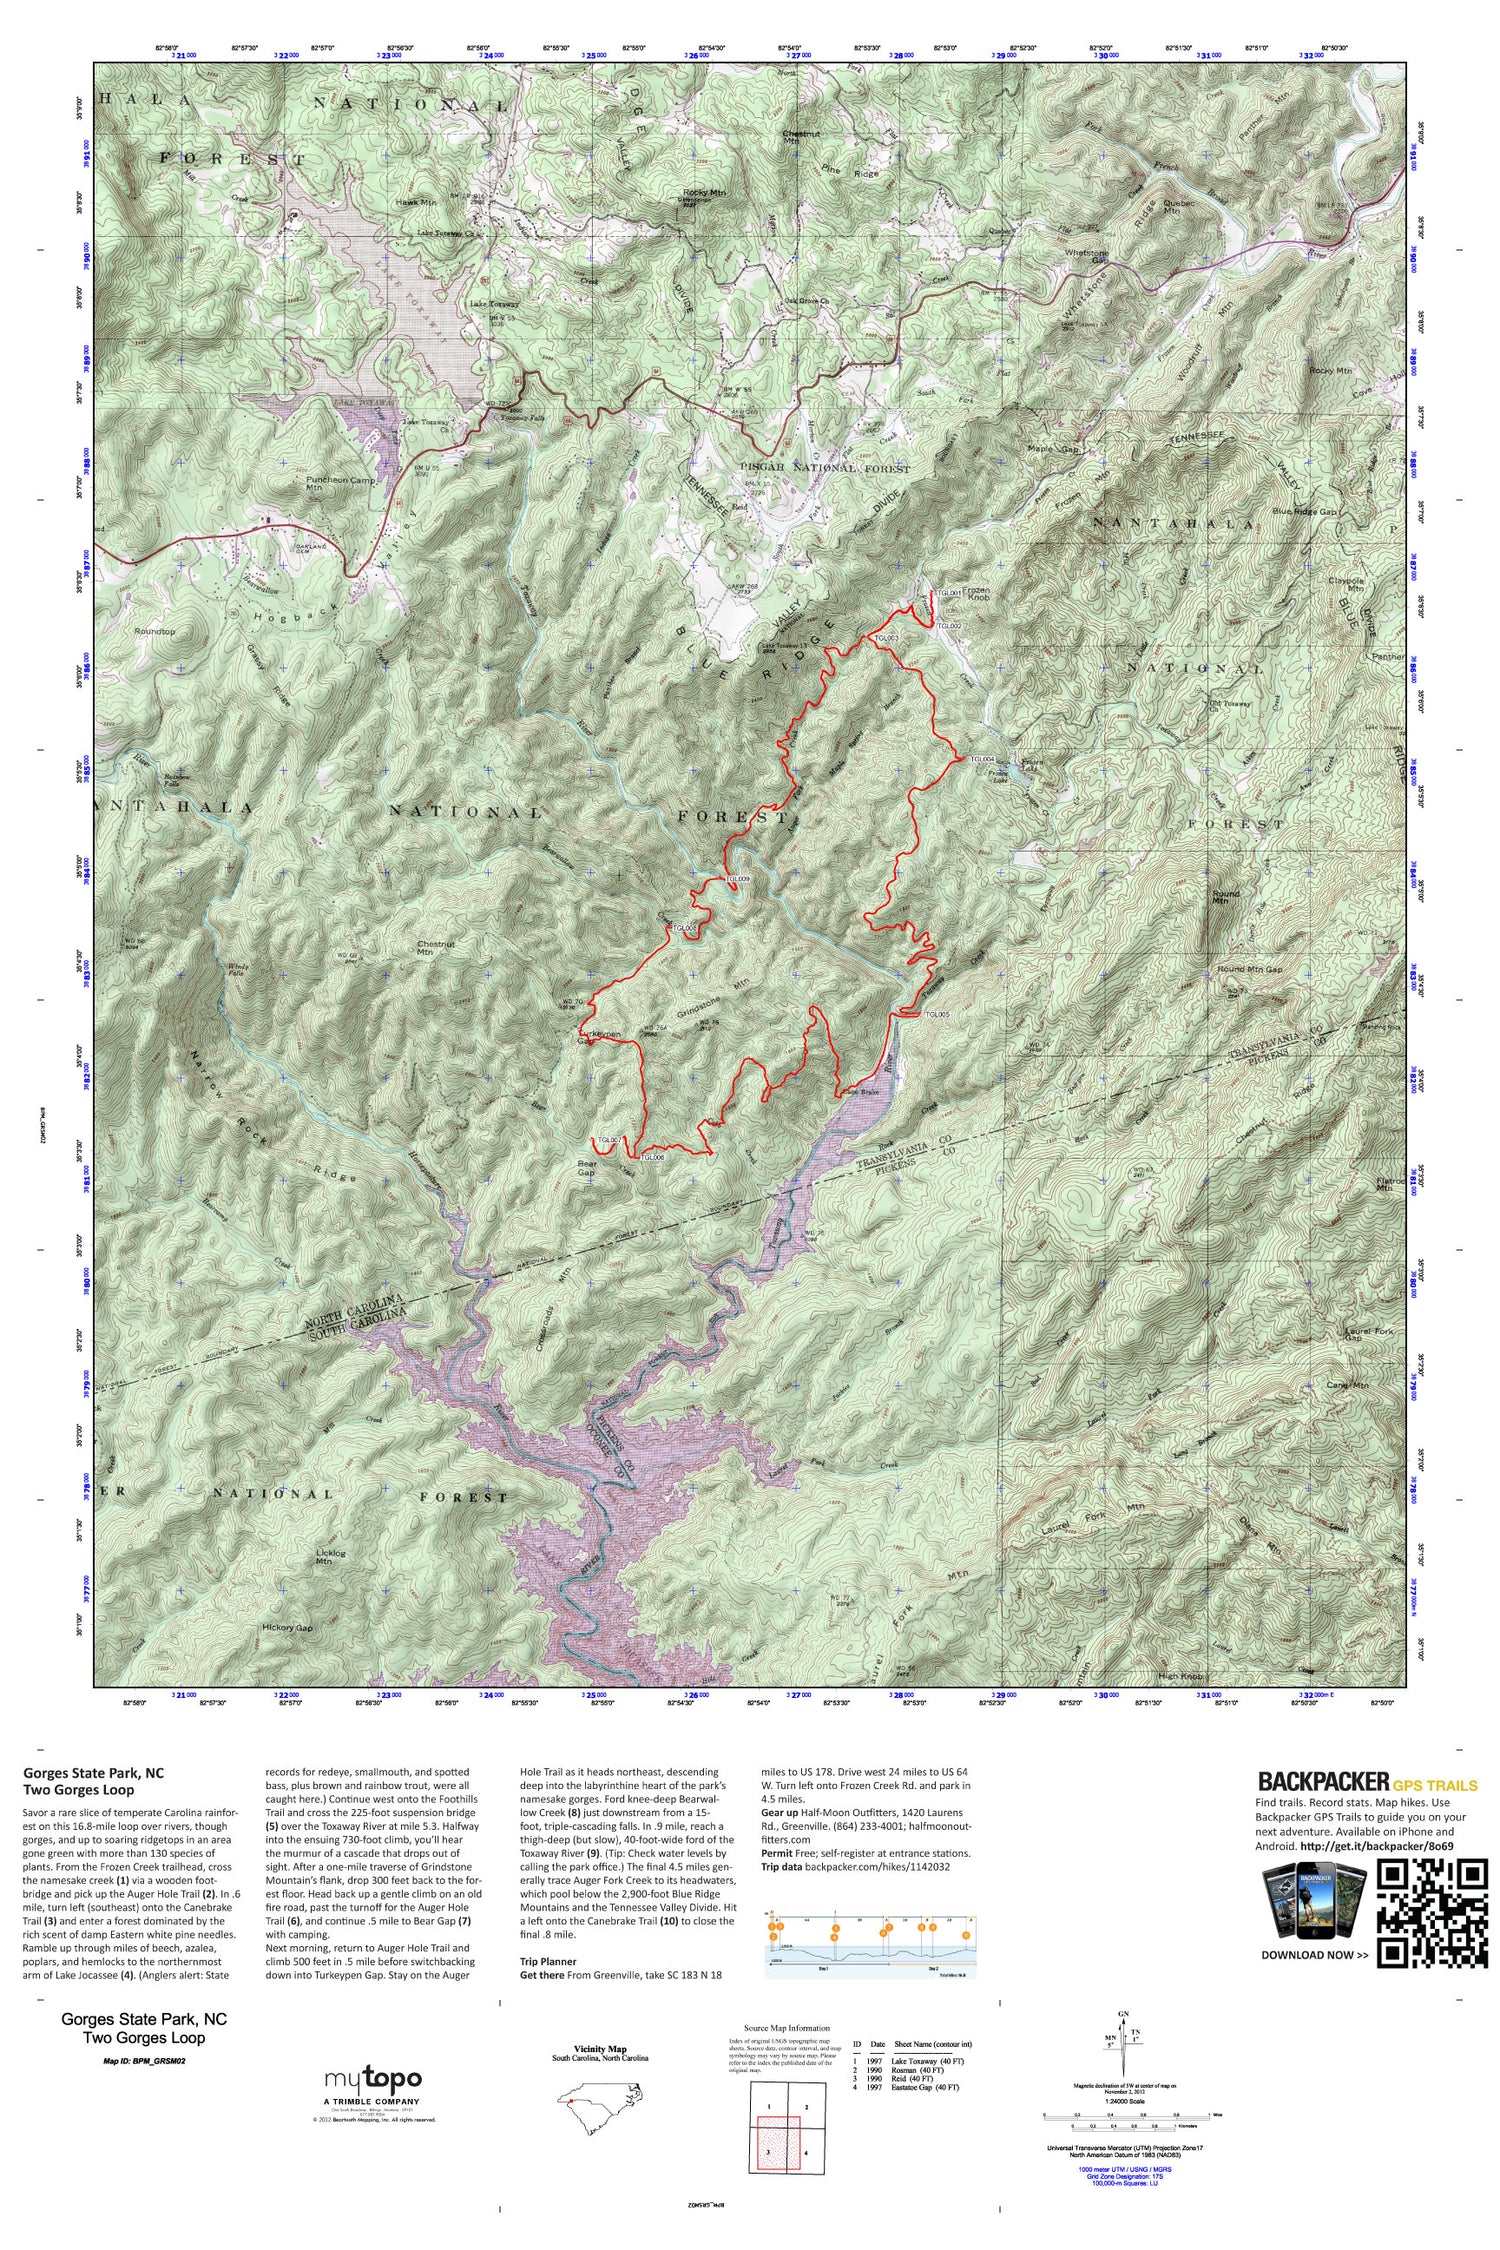 Two Gorges Loop Map (Gorges State Park, North Carolina) Image